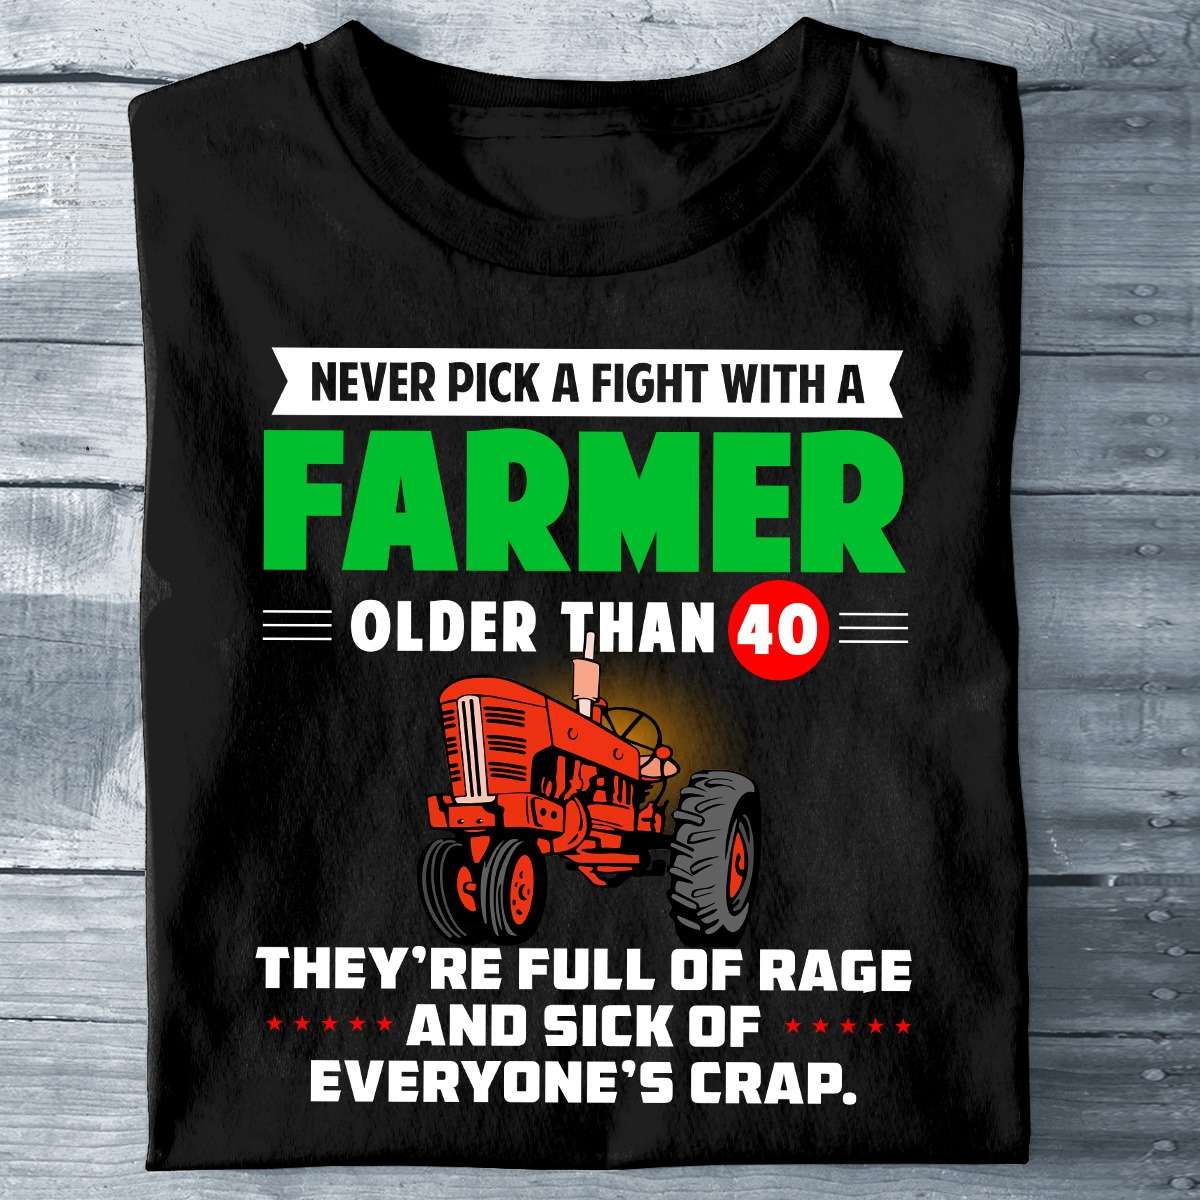 Never pick a fight with a farmer older than 40 - Tractor driver, farmer the job